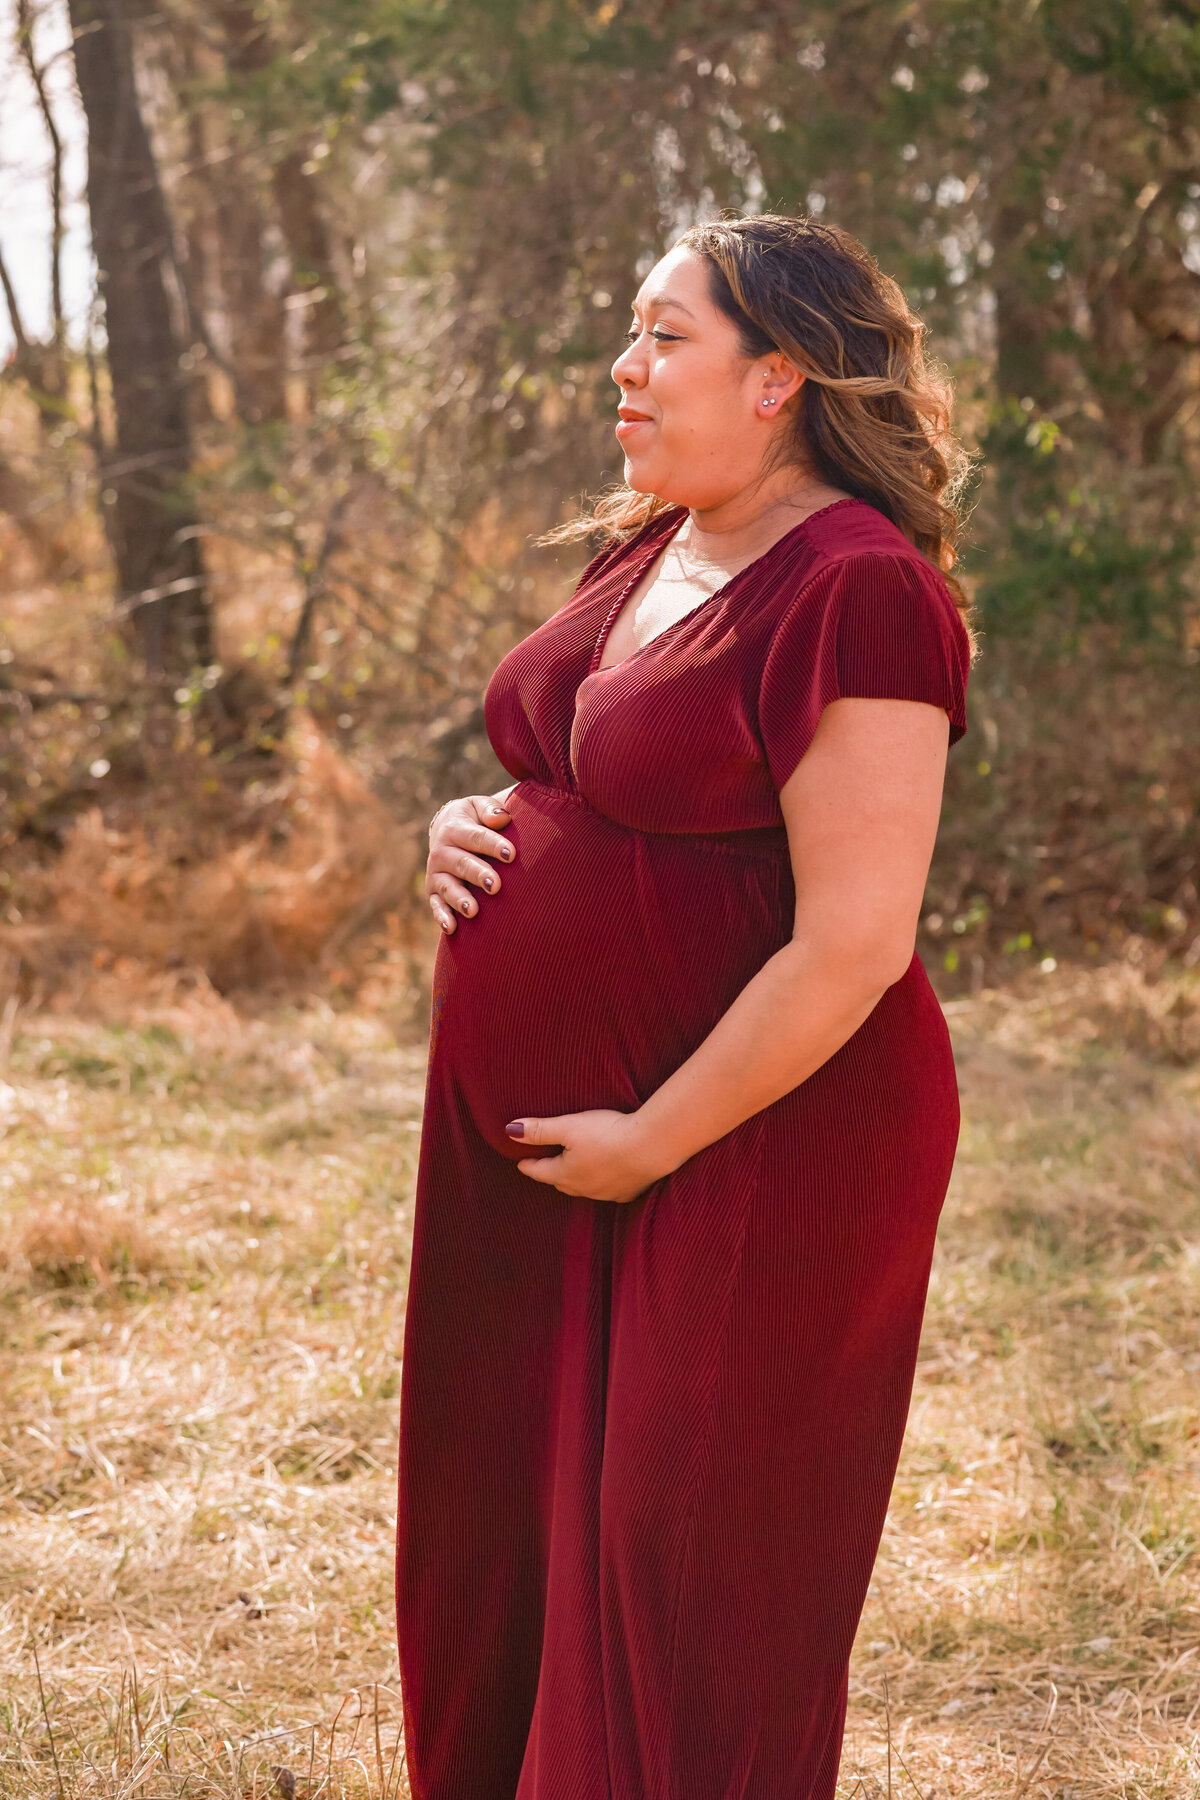 pregnant woman holding belly and wearing red dress in field with dead grass